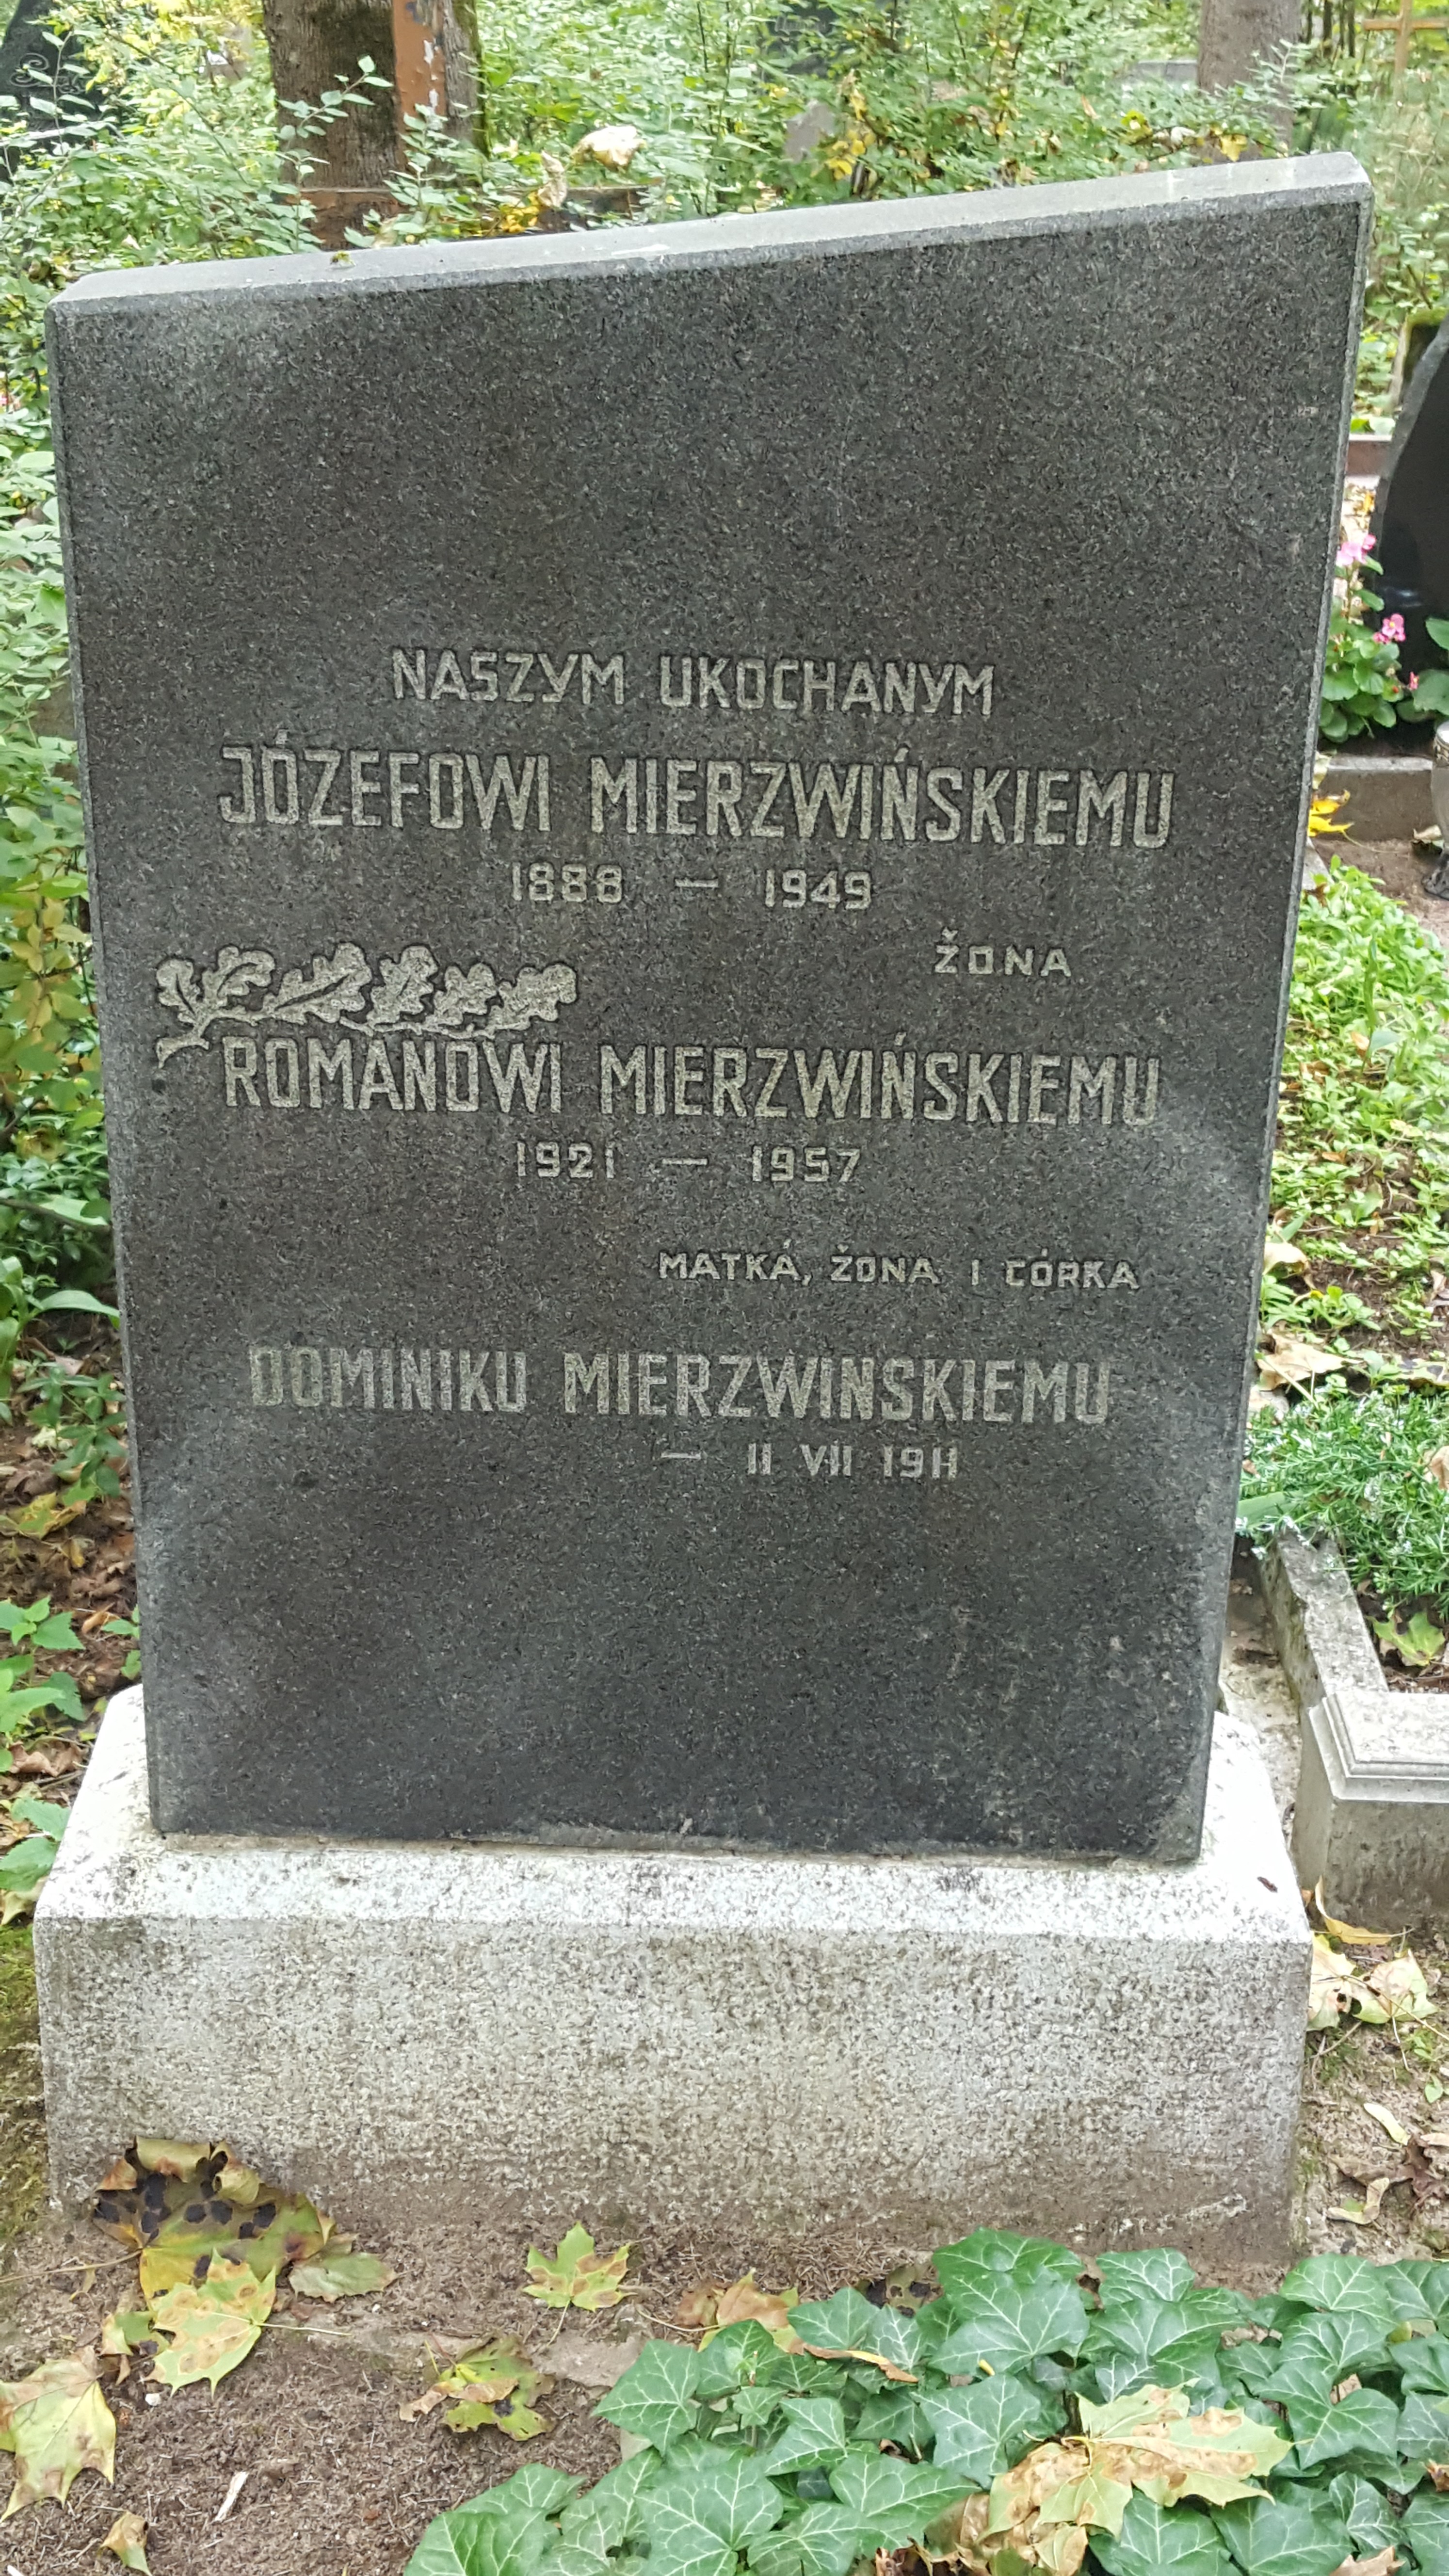 Tombstone of the Mierzwinski family, St. Michael's cemetery in Riga, as of 2021